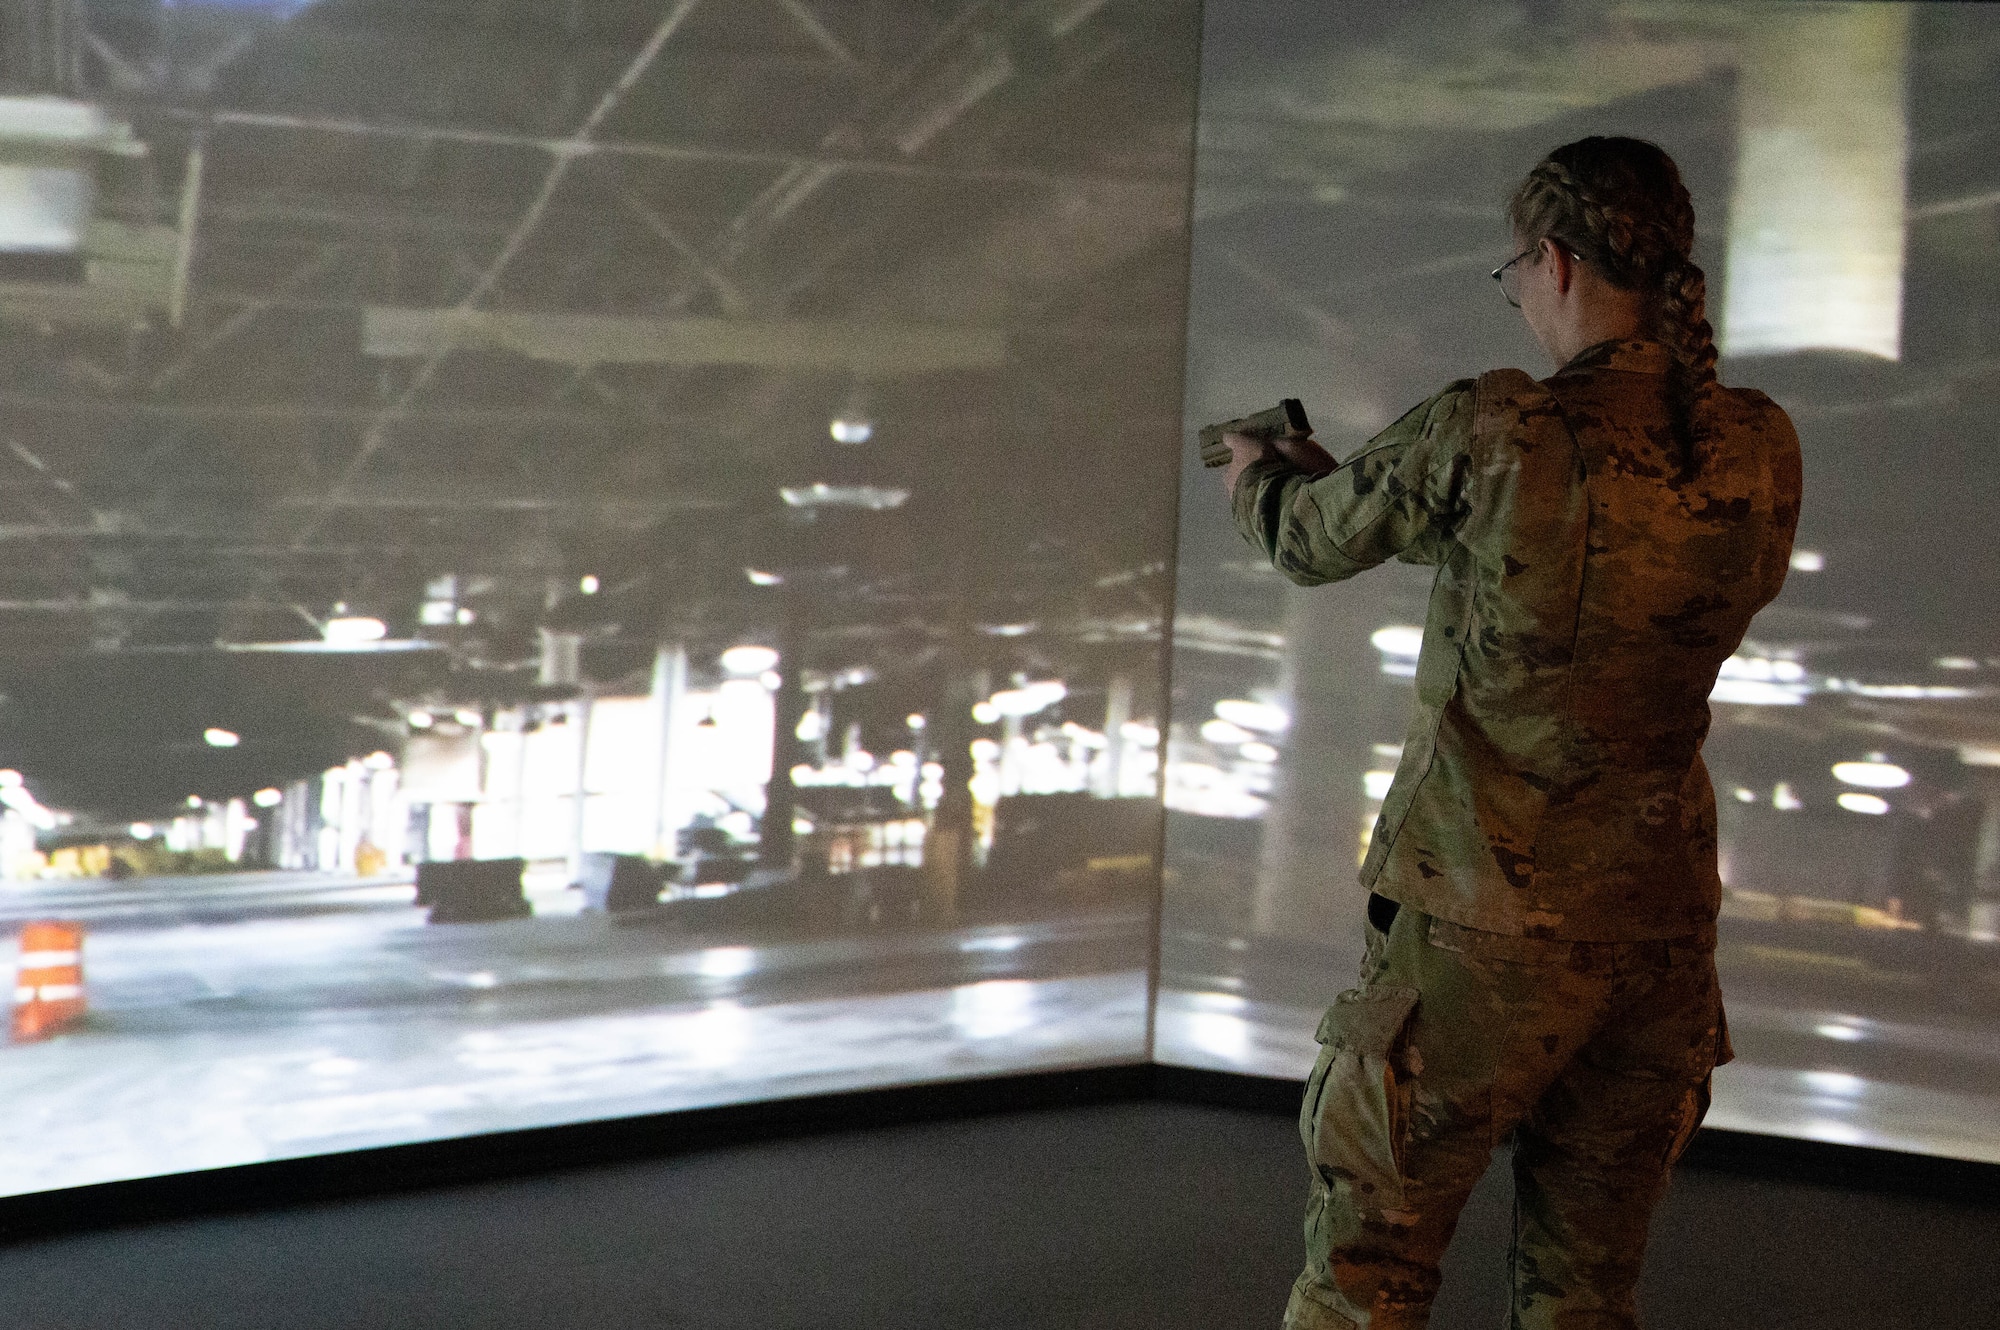 Natalia Lundquist, Air Force ROTC cadet, gets hands-on experience during a 3-D virtual shooting exercise at Altus Air Force Base, Oklahoma, March 15, 2024. Lundquist expressed interest in the security forces career path after graduating. (U.S. Air Force photo by Airman 1st Class Heidi Bucins)